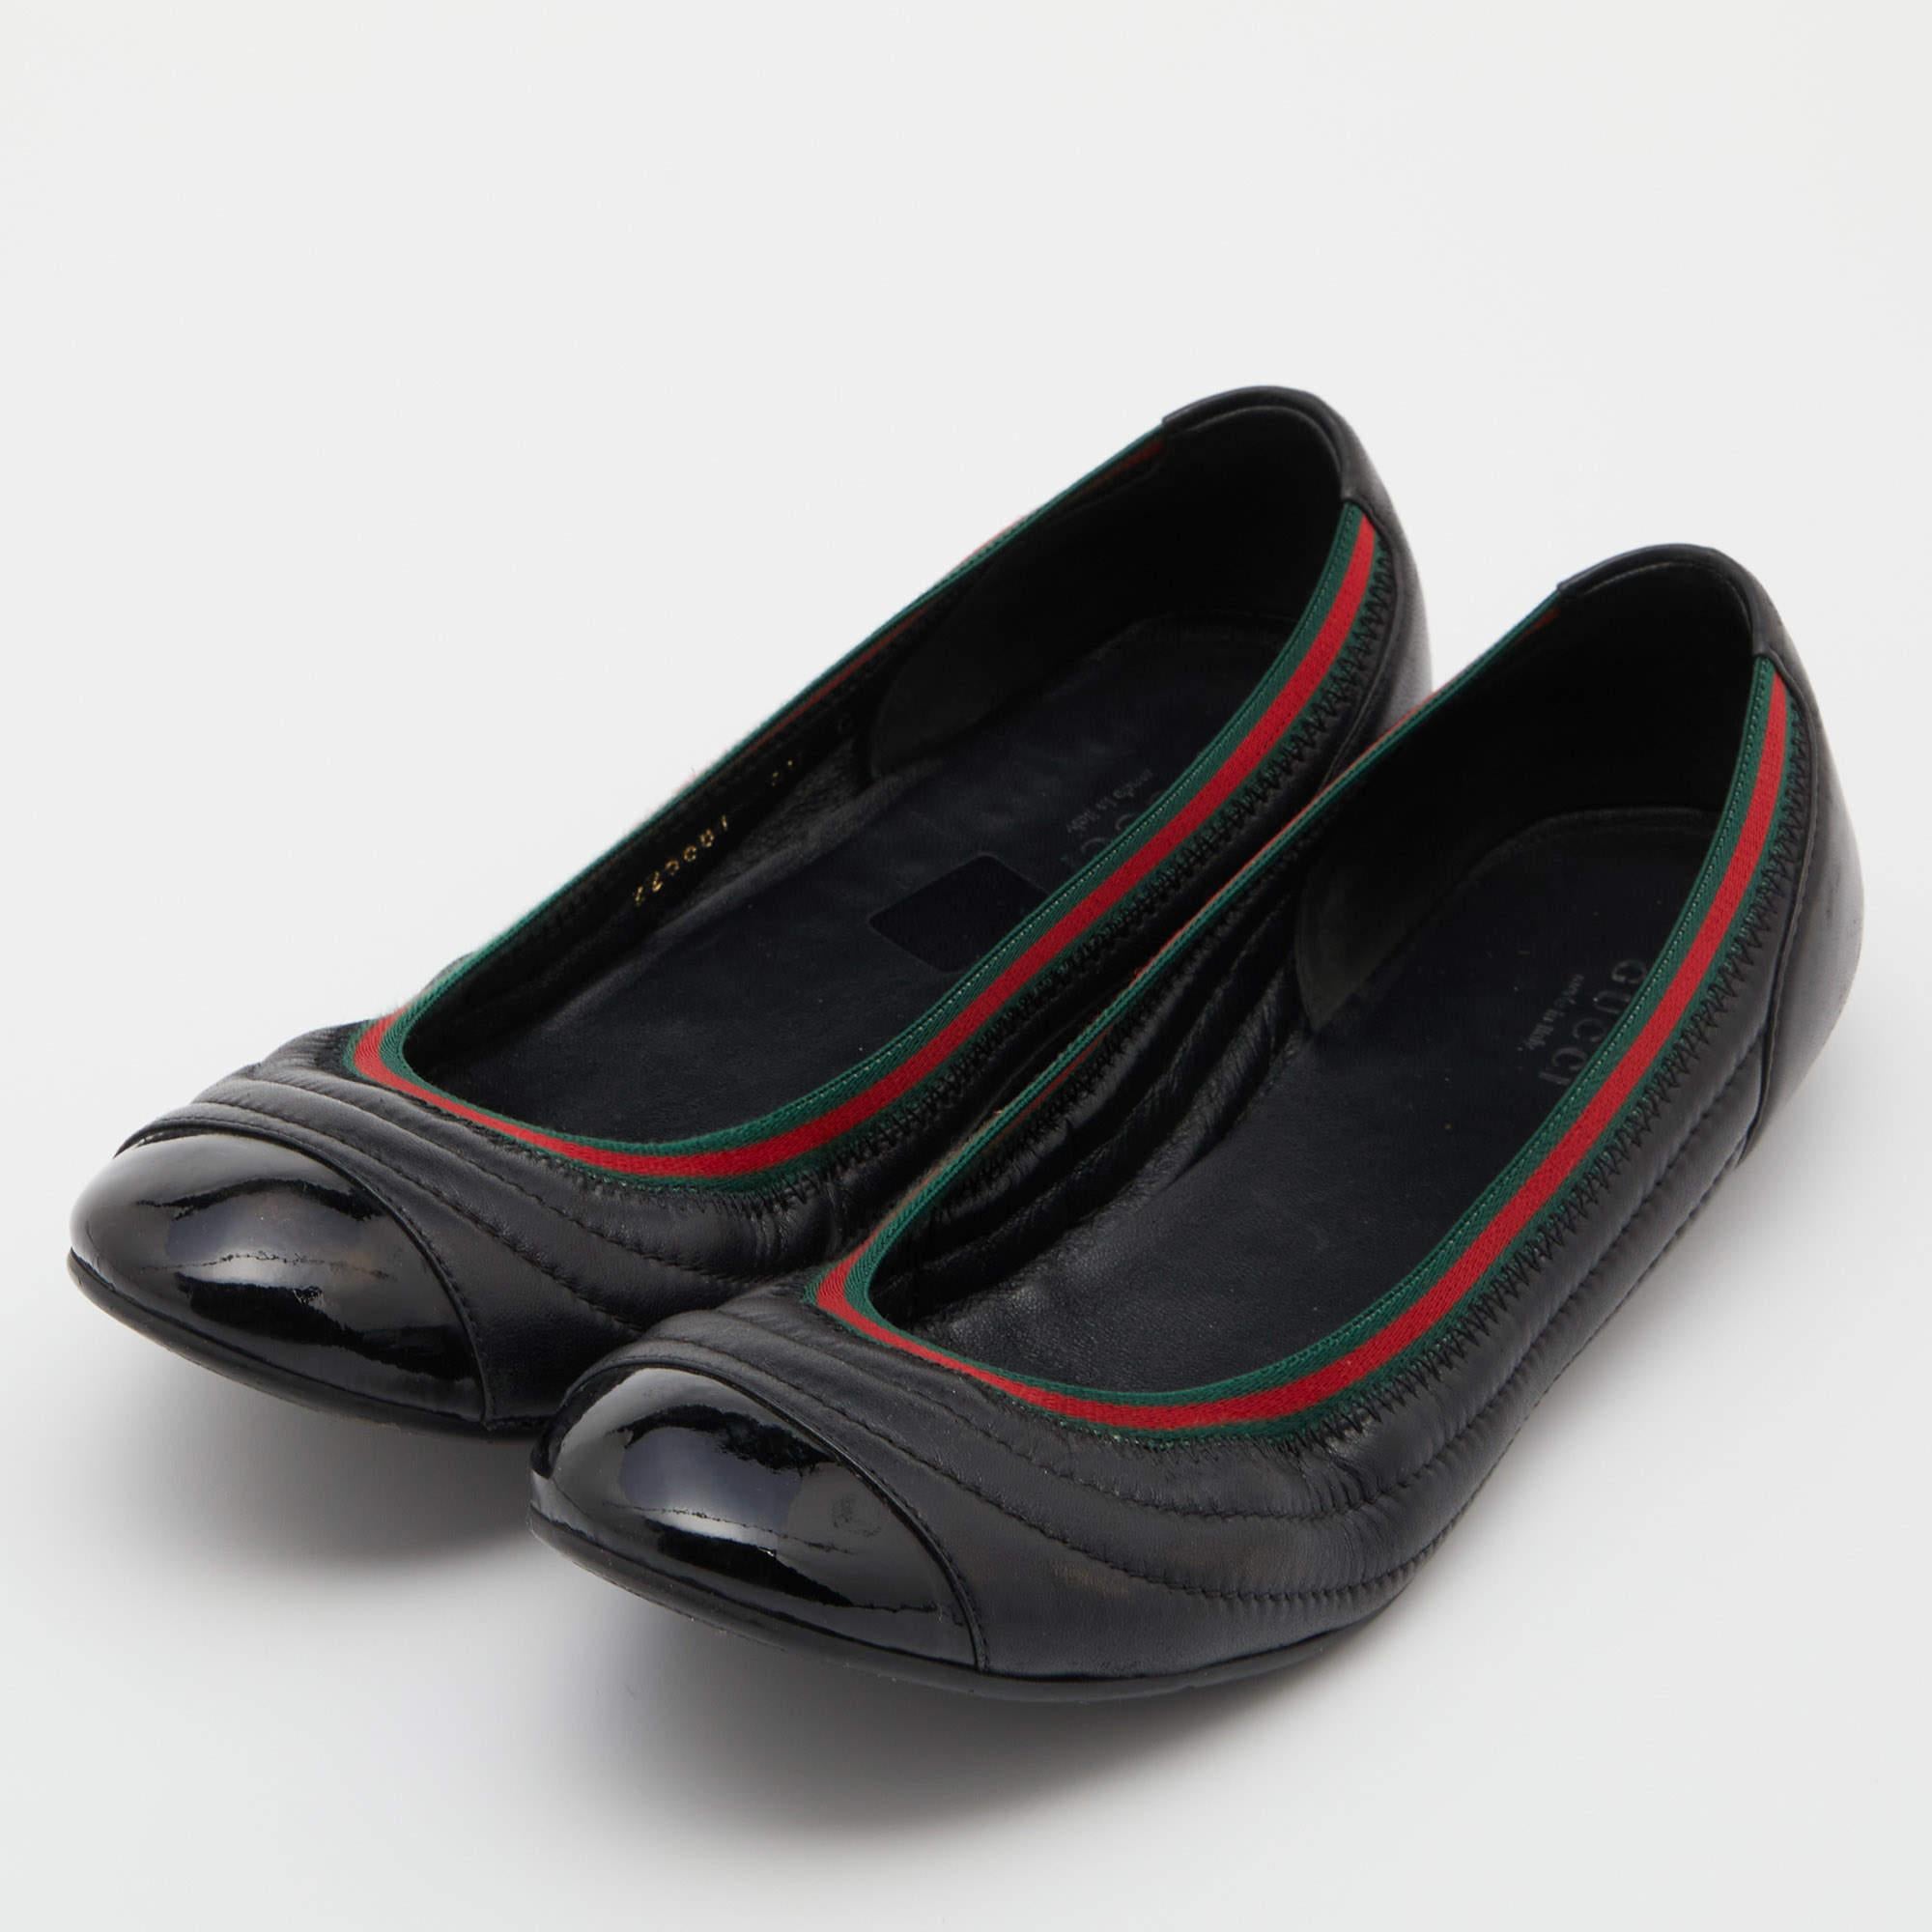 Complete your look by adding these designer ballet flats to your collection of everyday footwear. They are crafted skilfully to grant the perfect fit and style.

Includes: Original Box, Info Booklet